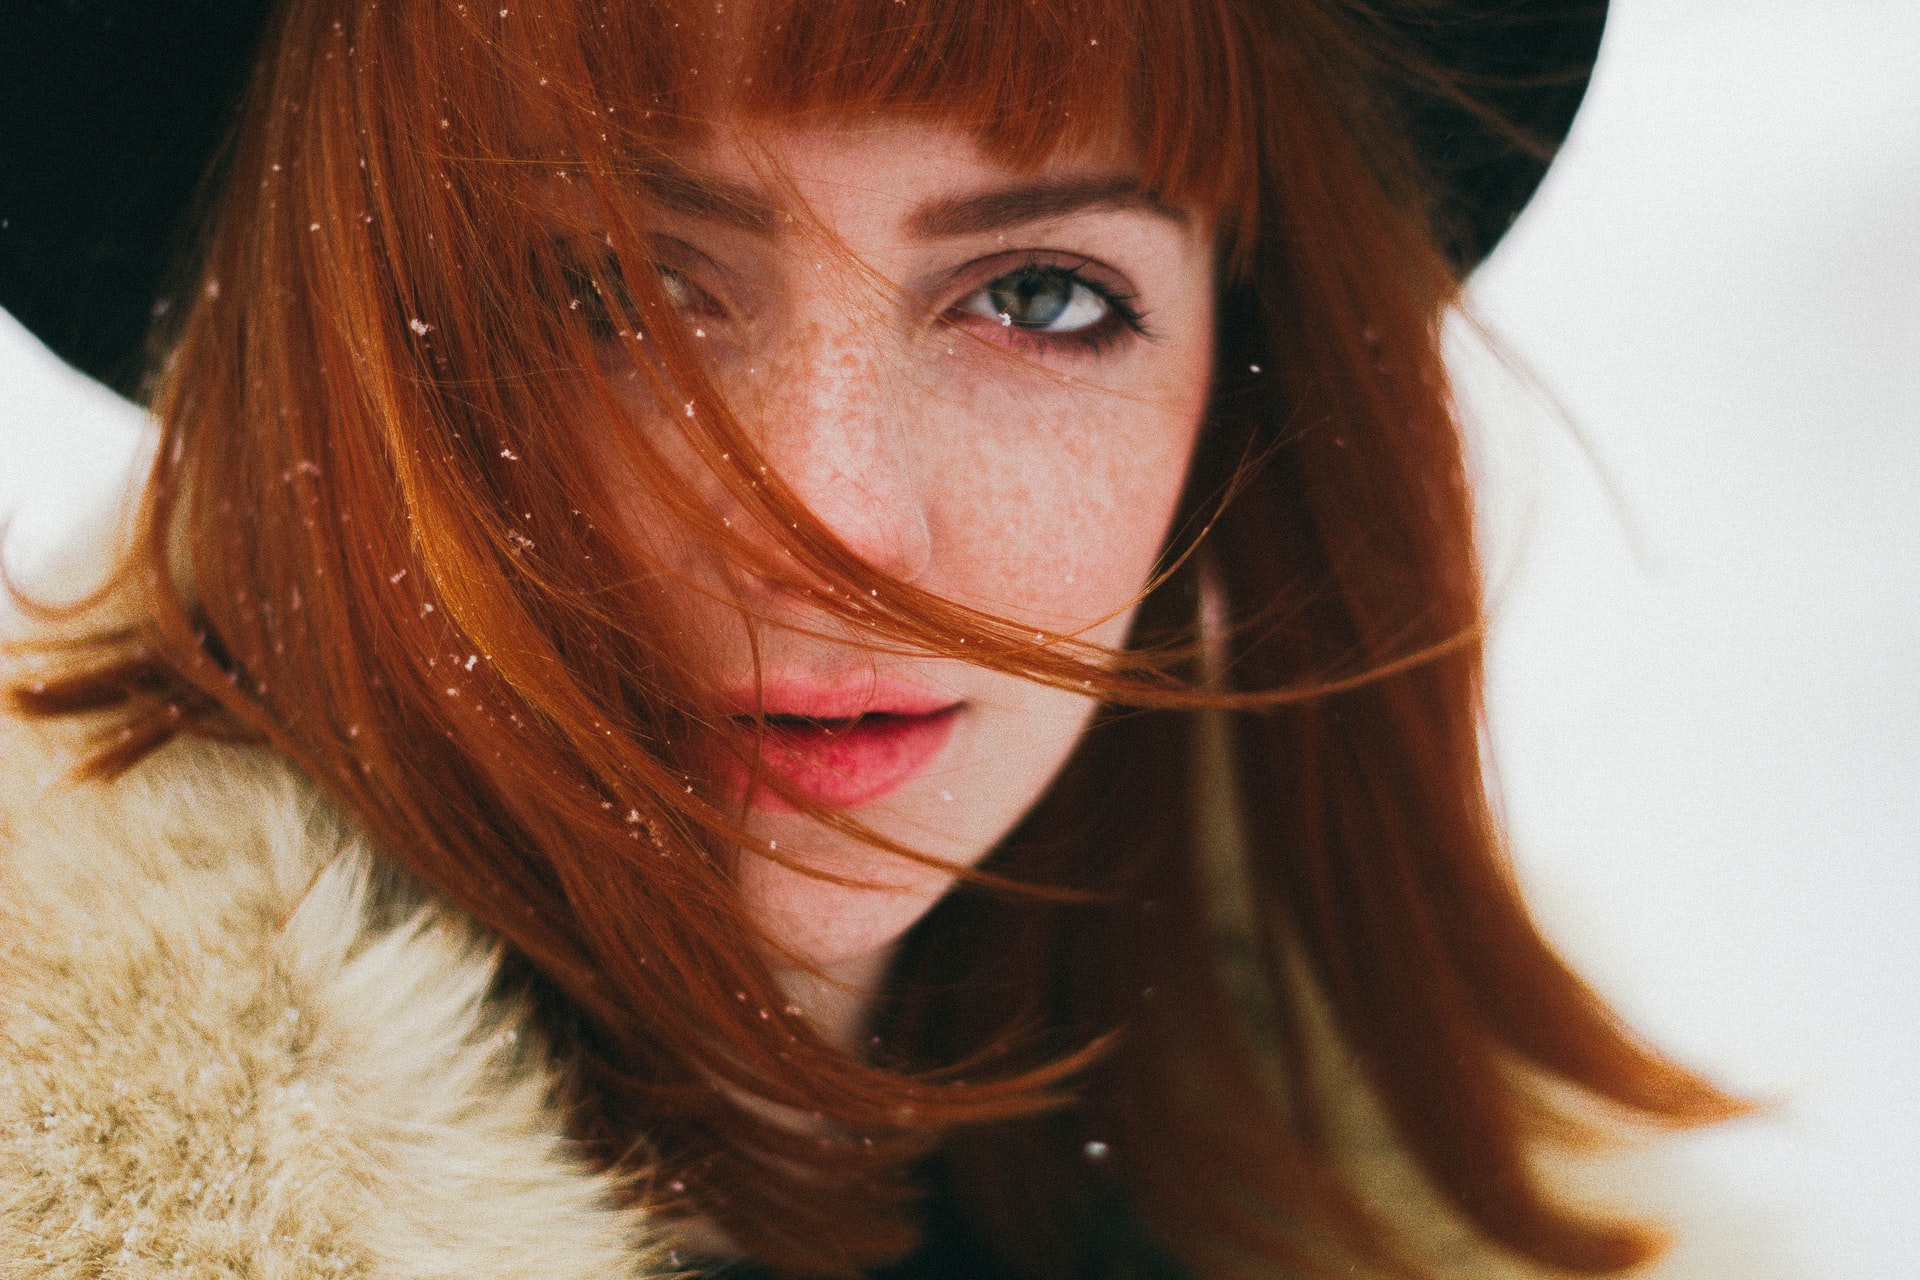 6 Skincare Tips to Keep Your Glow This Winter